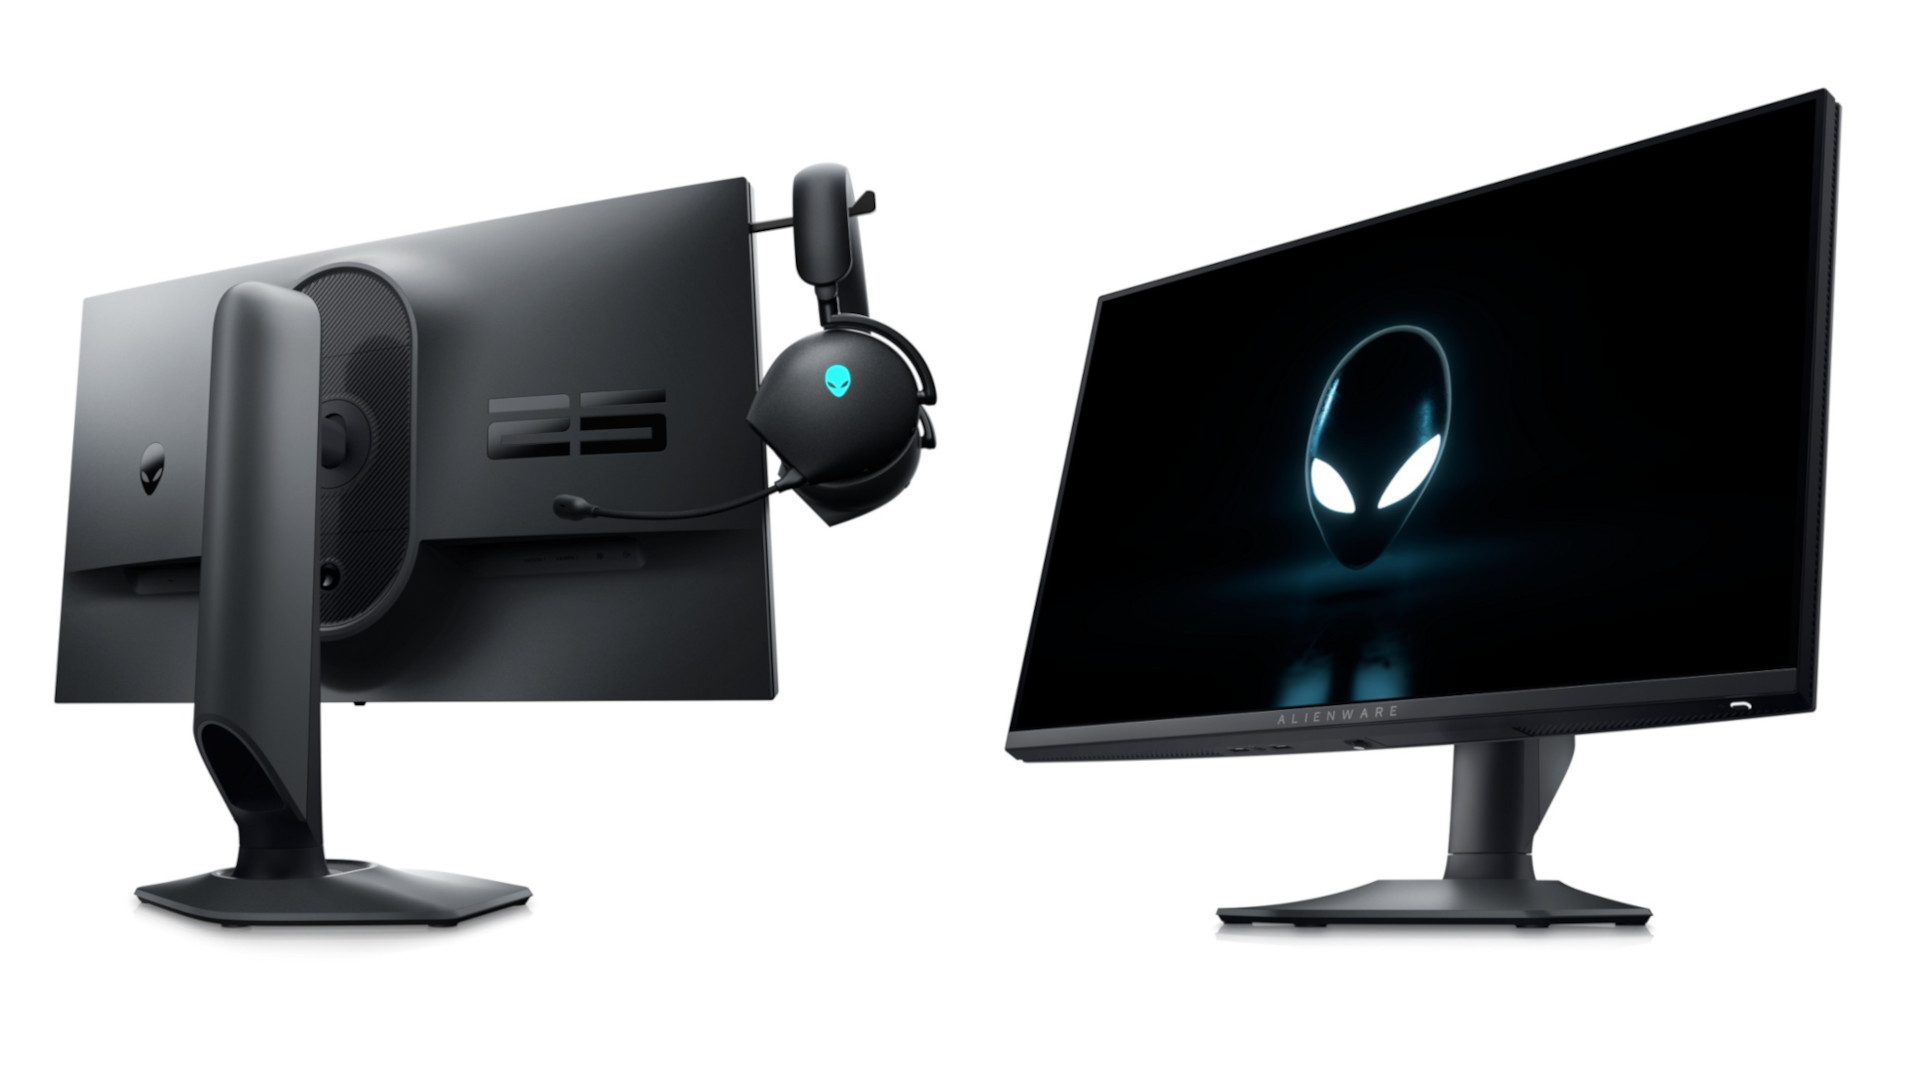 New Alienware 360Hz gaming monitor boasts 0.5ms response time